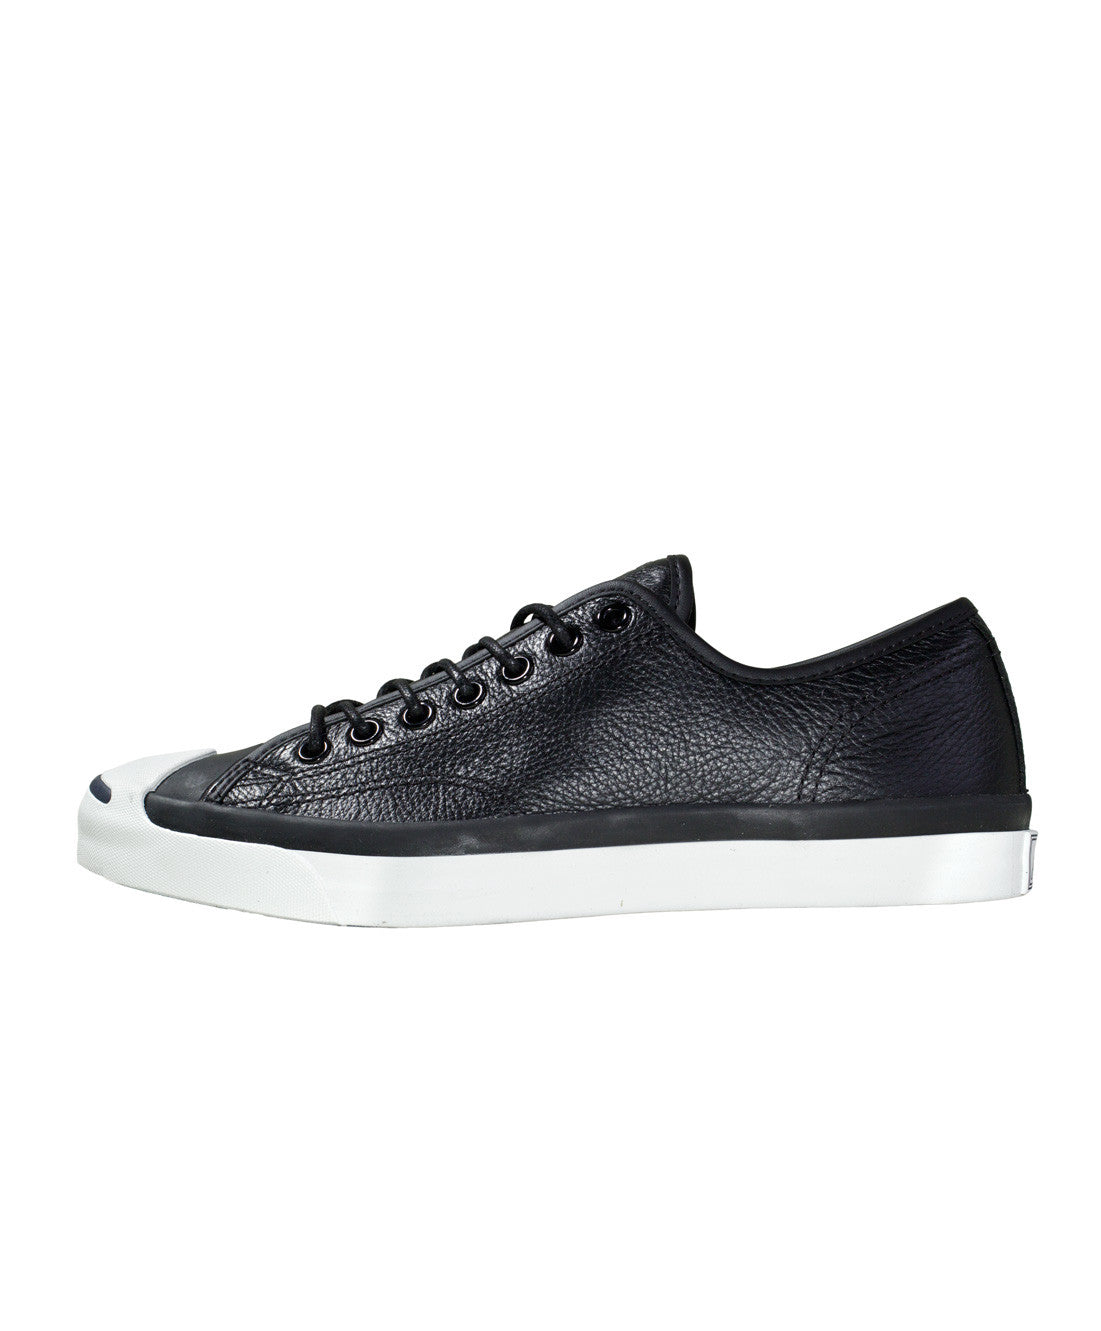 Converse: Jack Purcell Tumbled Leather (Black) OLDDD – Extra Butter